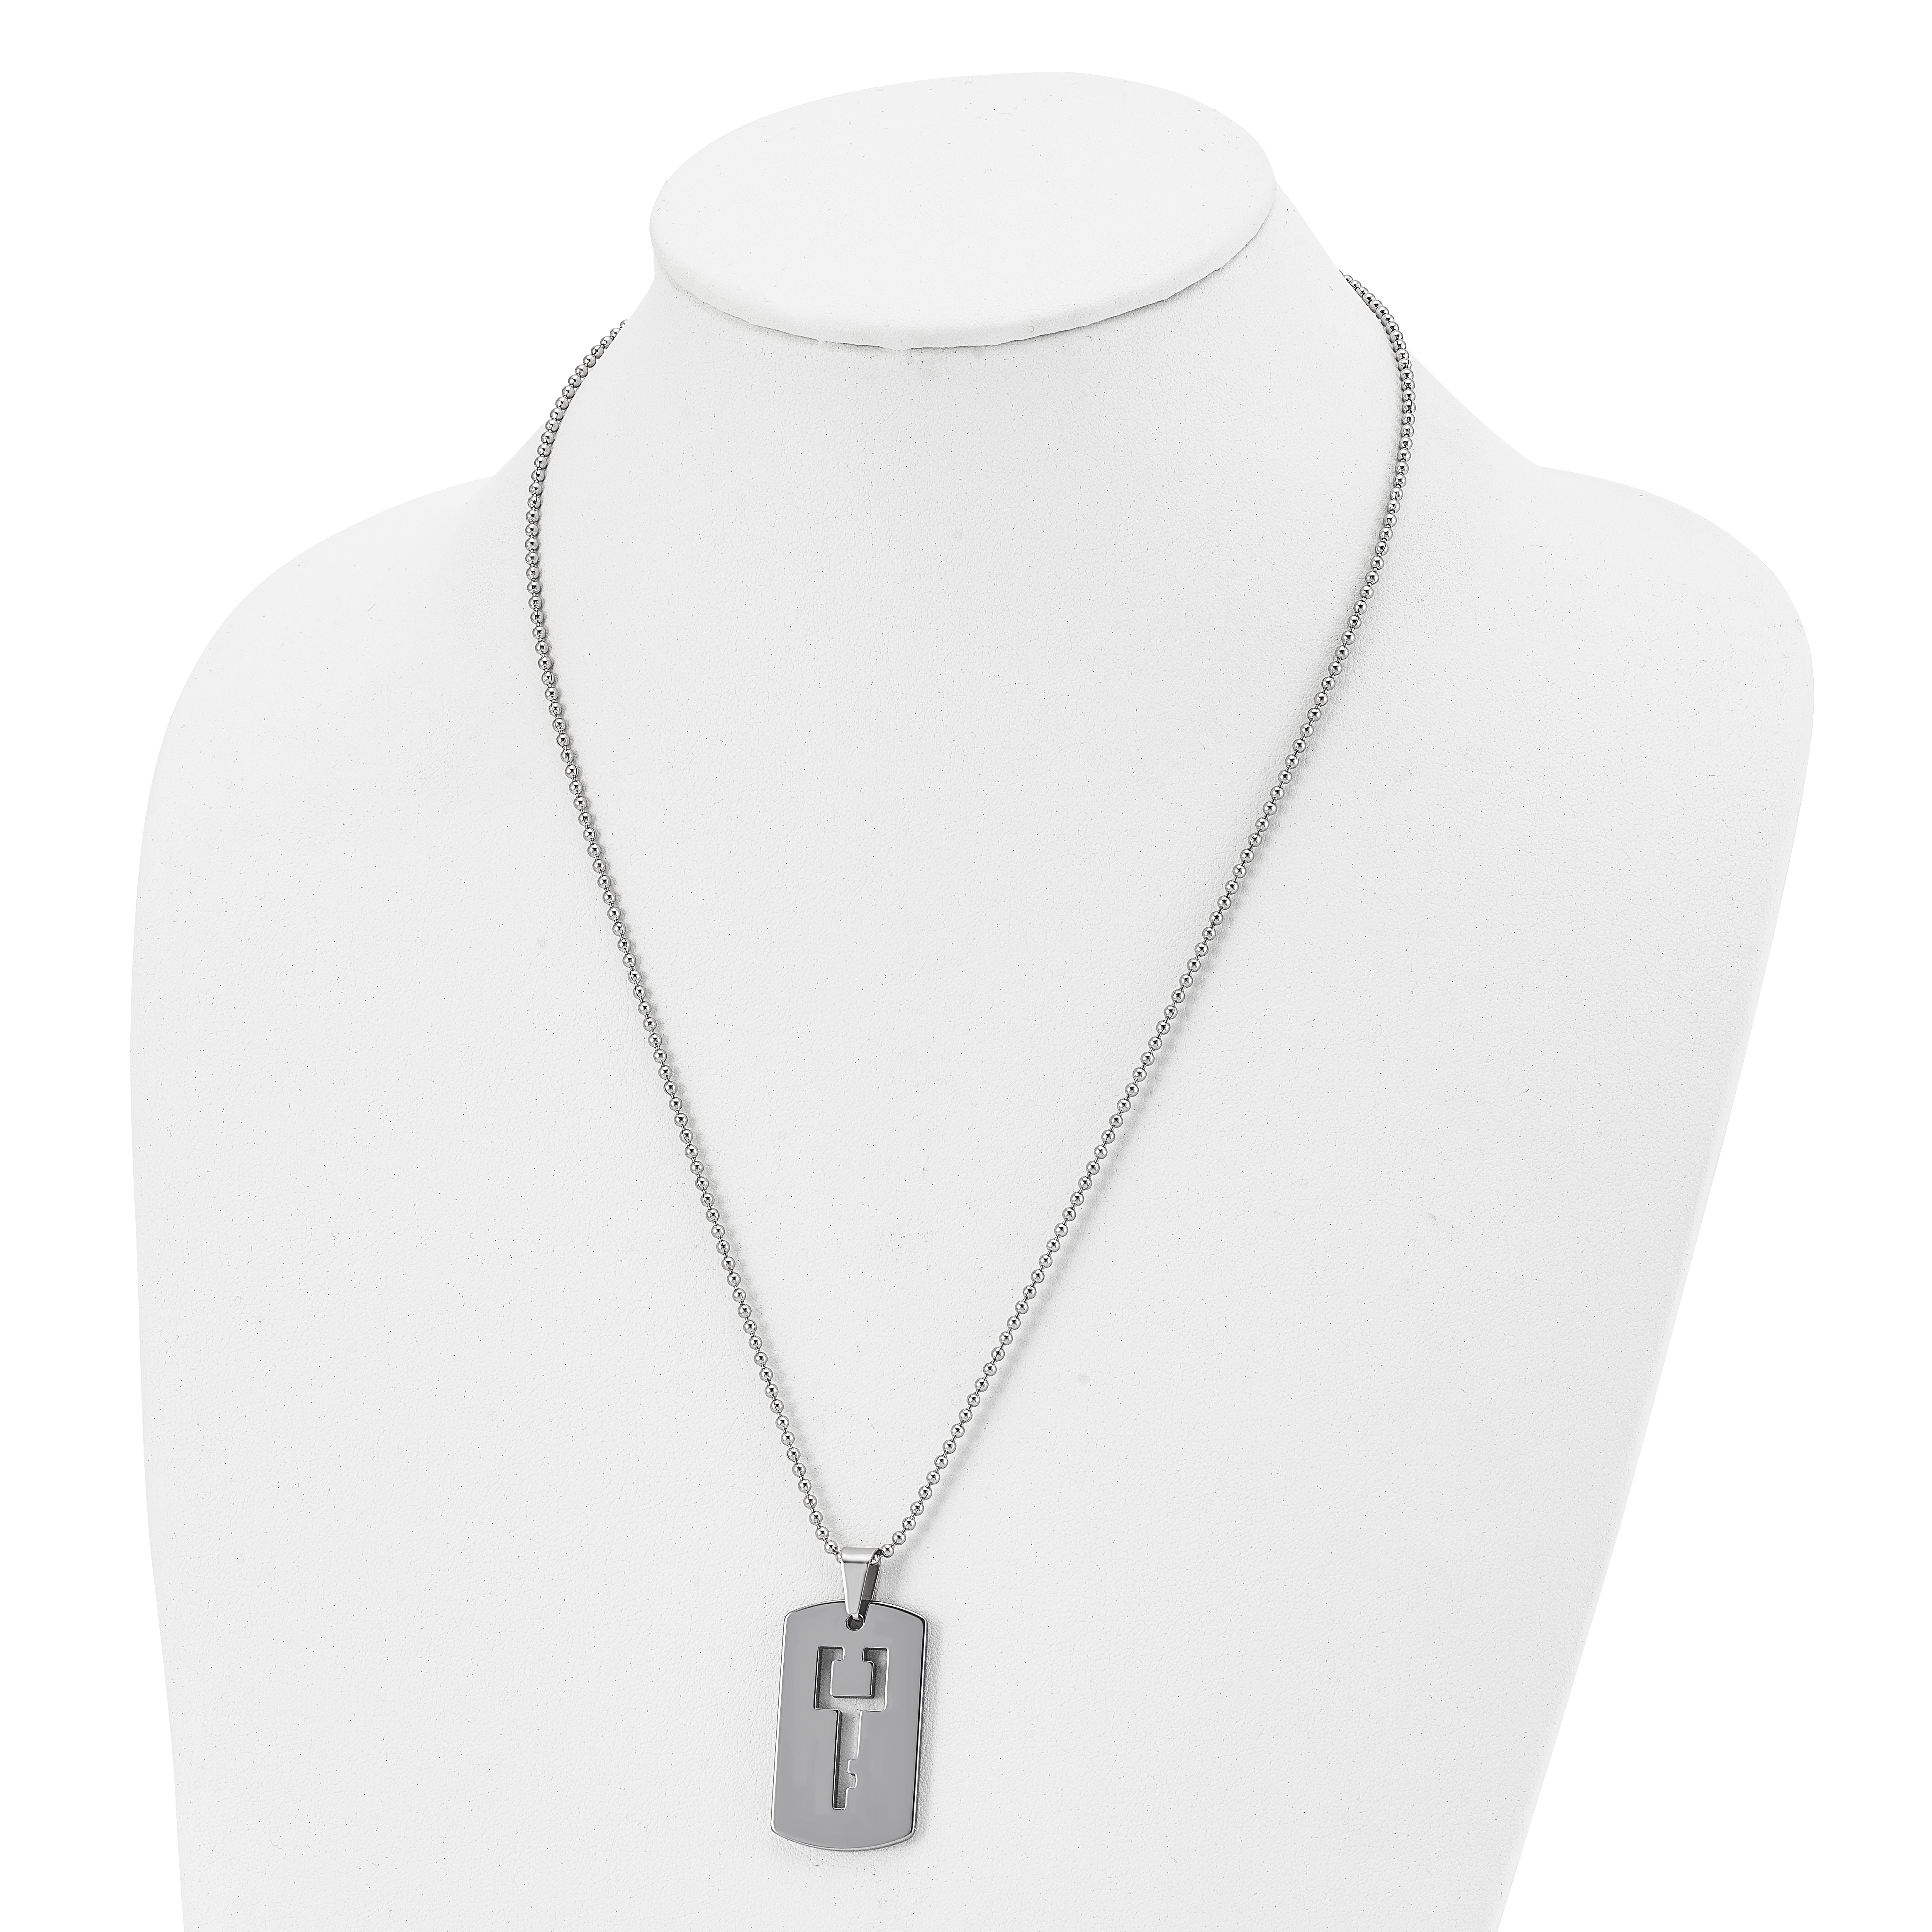 Chisel Tungsten Polished Dog Tag with Key Cut-out 22 inch Necklace